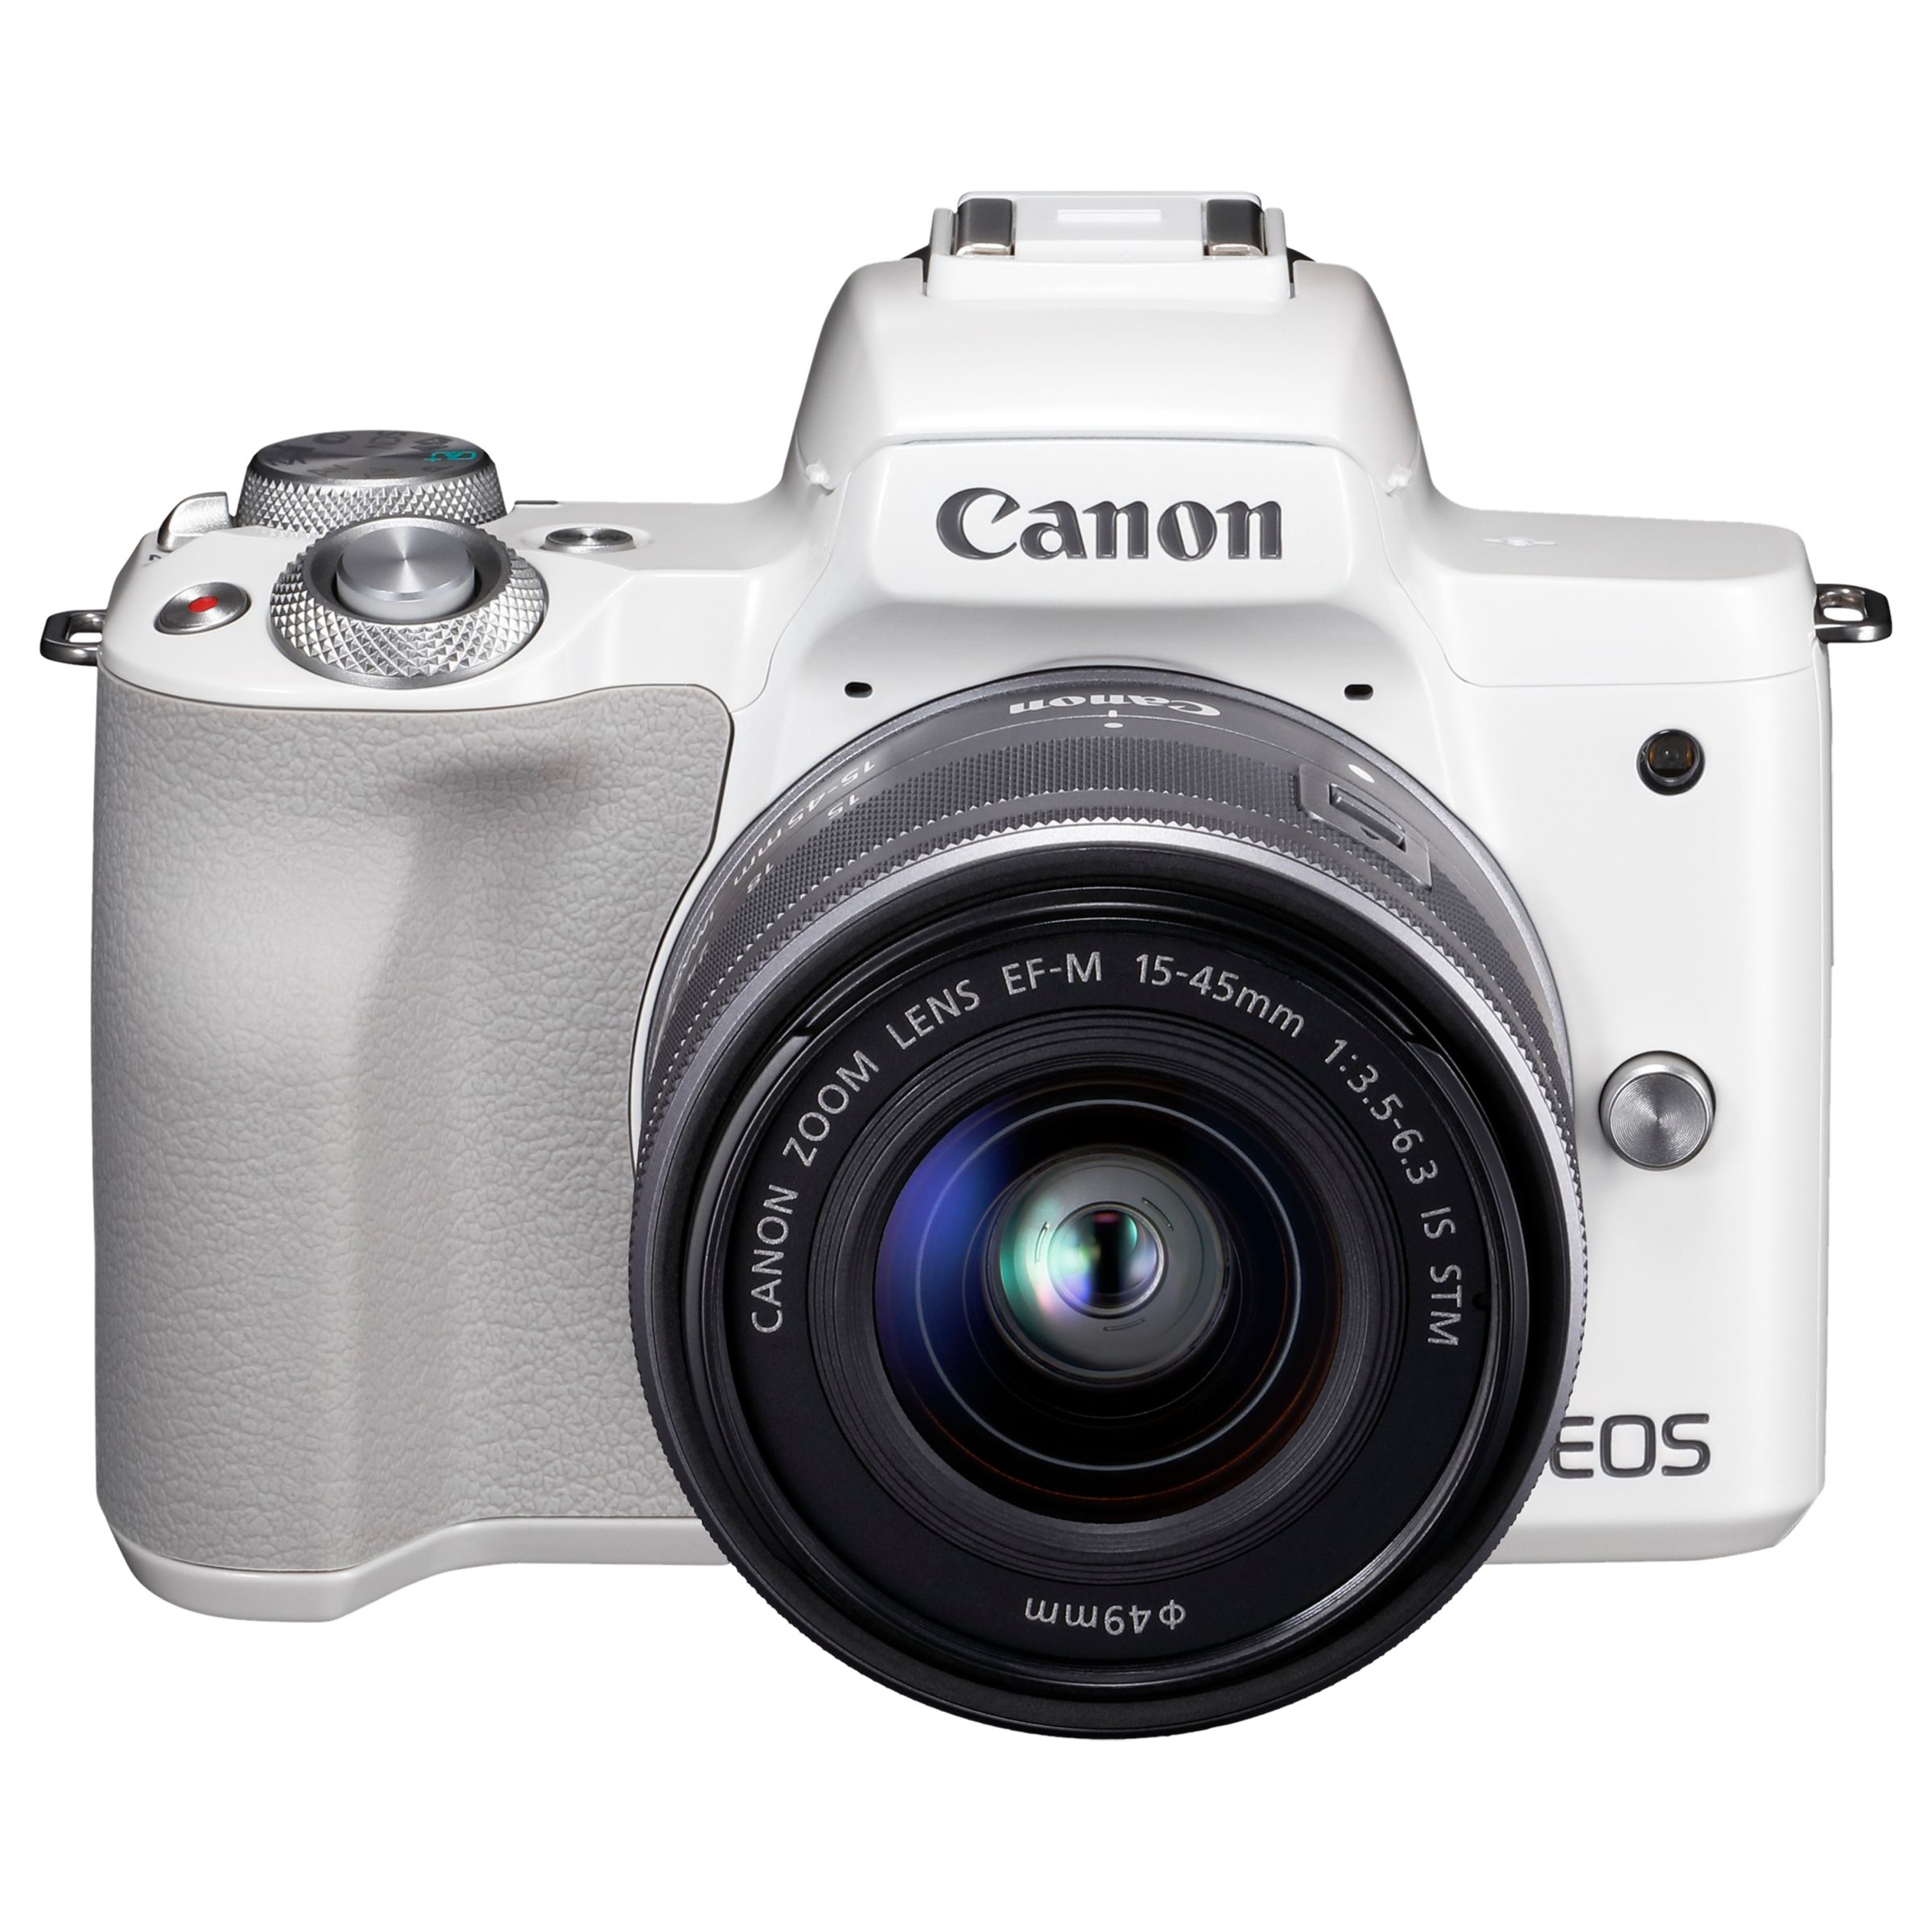 Canon EOS M50 Compact System Camera with EF-M 15-45mm f/3.5-6.3 IS STM lens, 4K Ultra HD, 24.1MP, Wi-Fi, Bluetooth, NFC, OLED EVF, 3 Vari-Angle Touch Screen